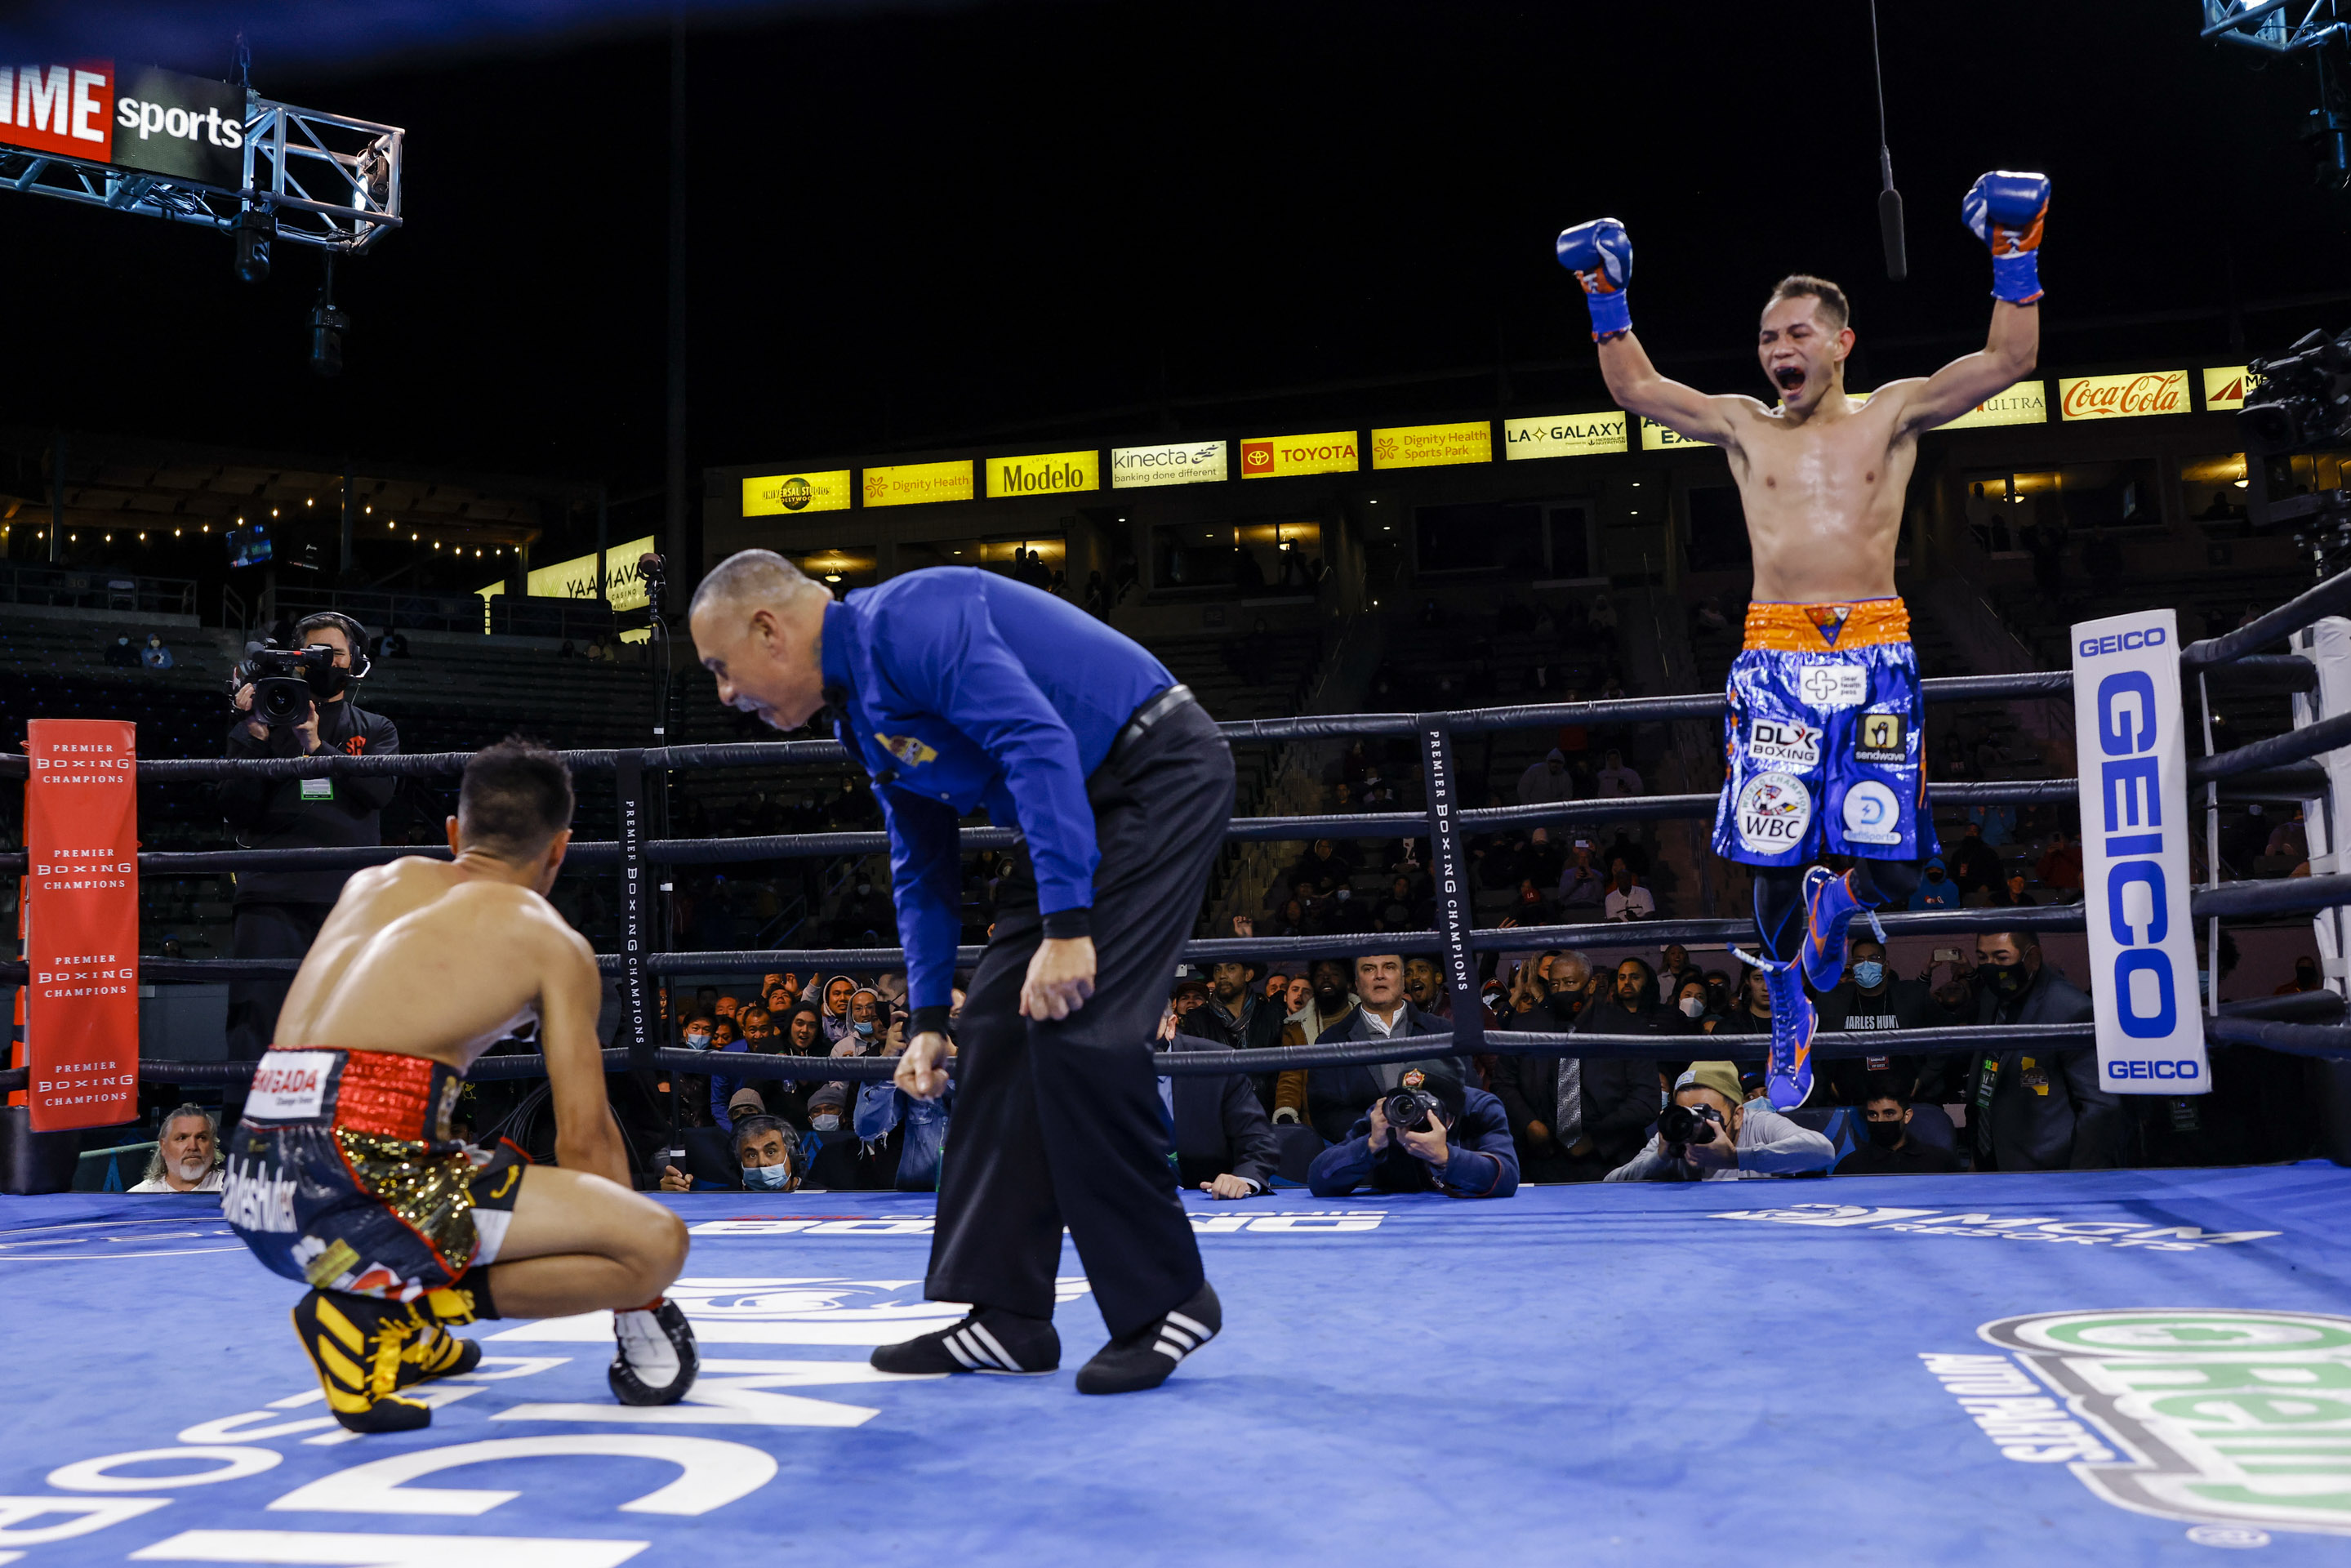 Nonito Donaire knocked out Reymart Gaballo on a body shot in round four